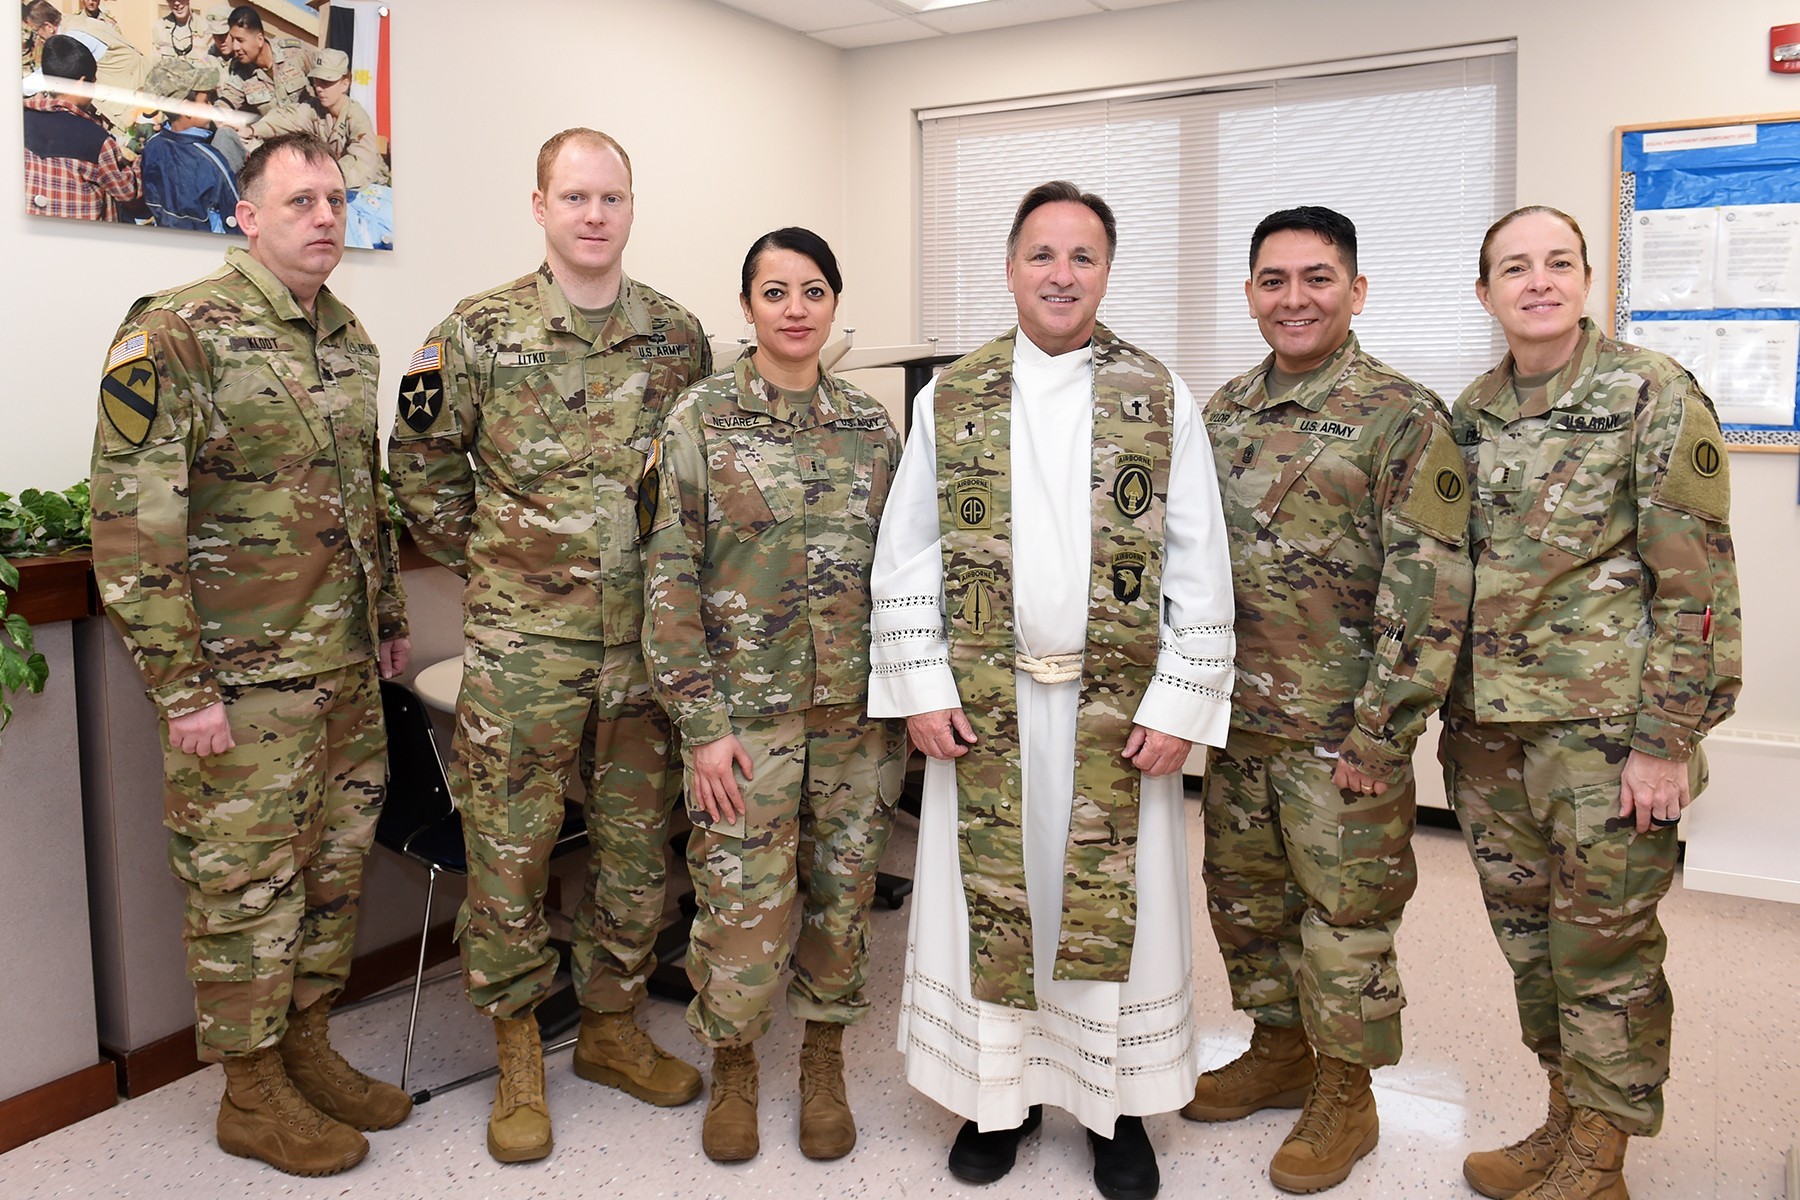 Former Army Chaplain Who Inspired Famed Snl Character Role Continues Service Providing Religious